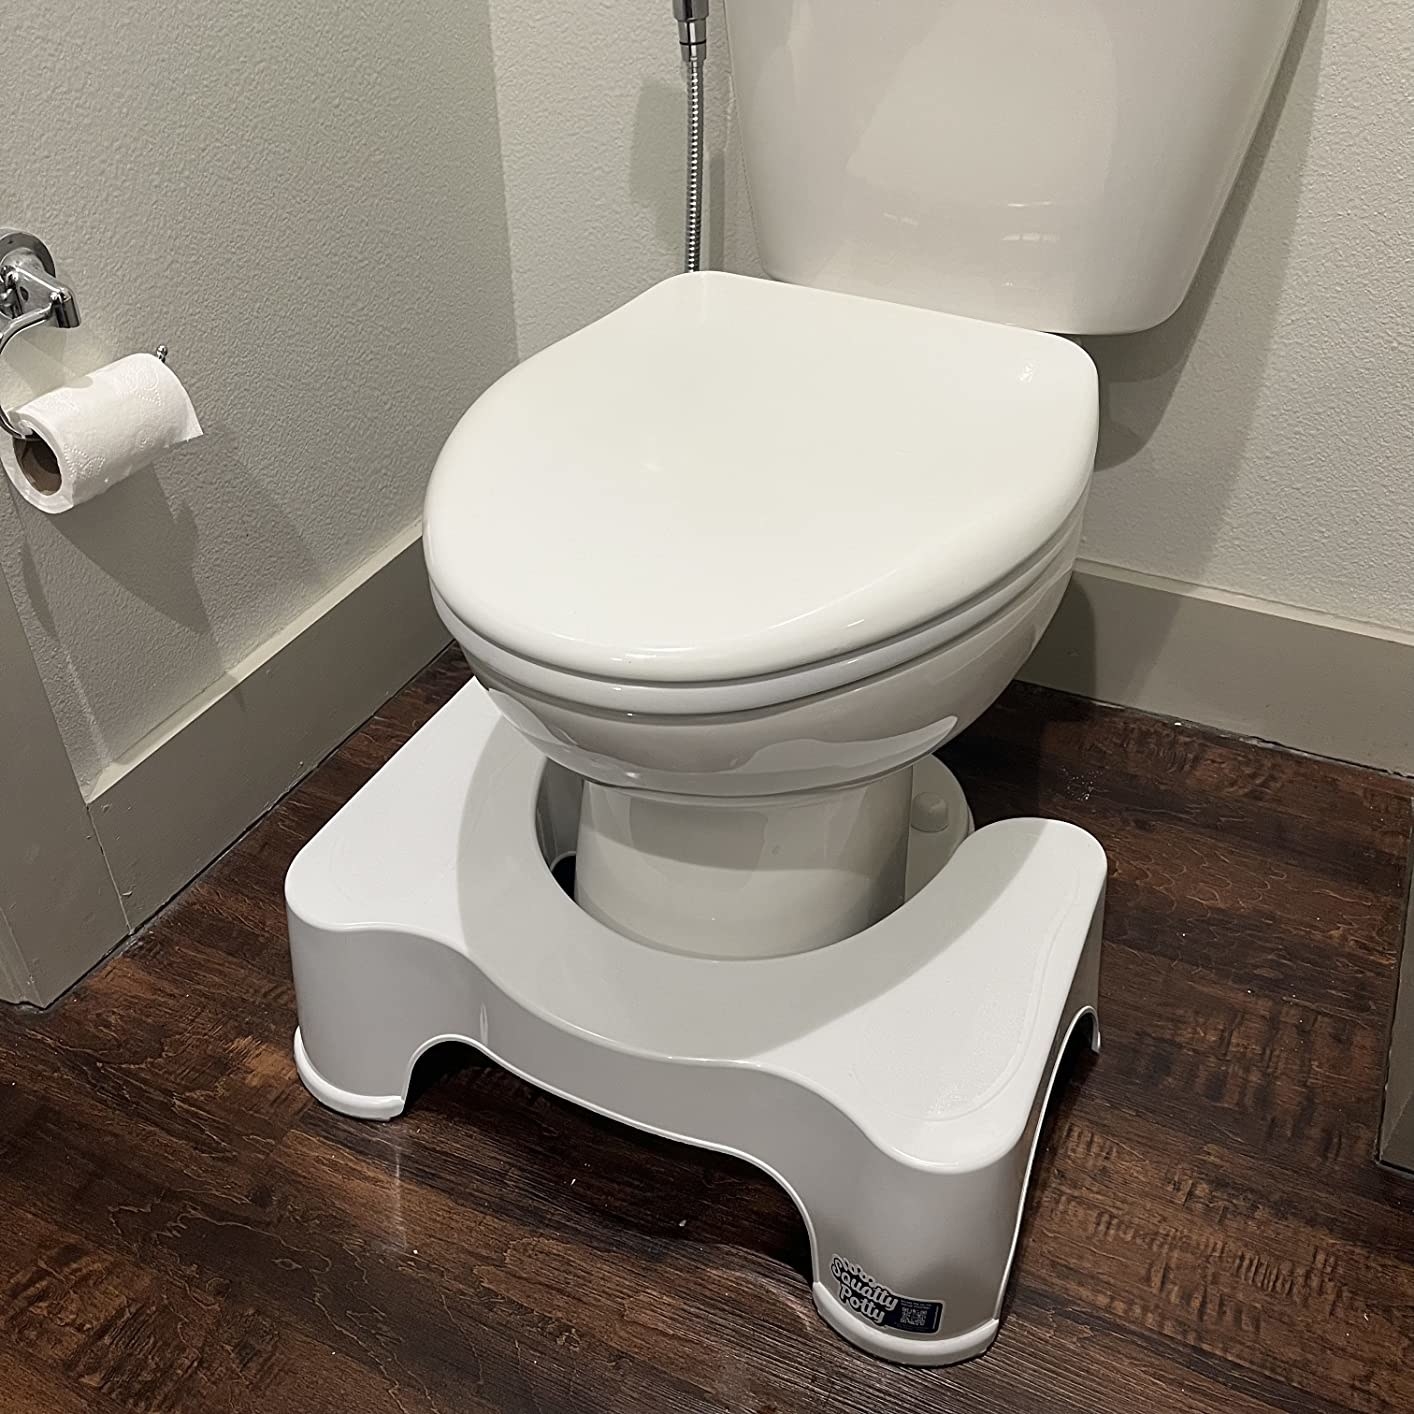 Squatty Potty - As Seen on TV